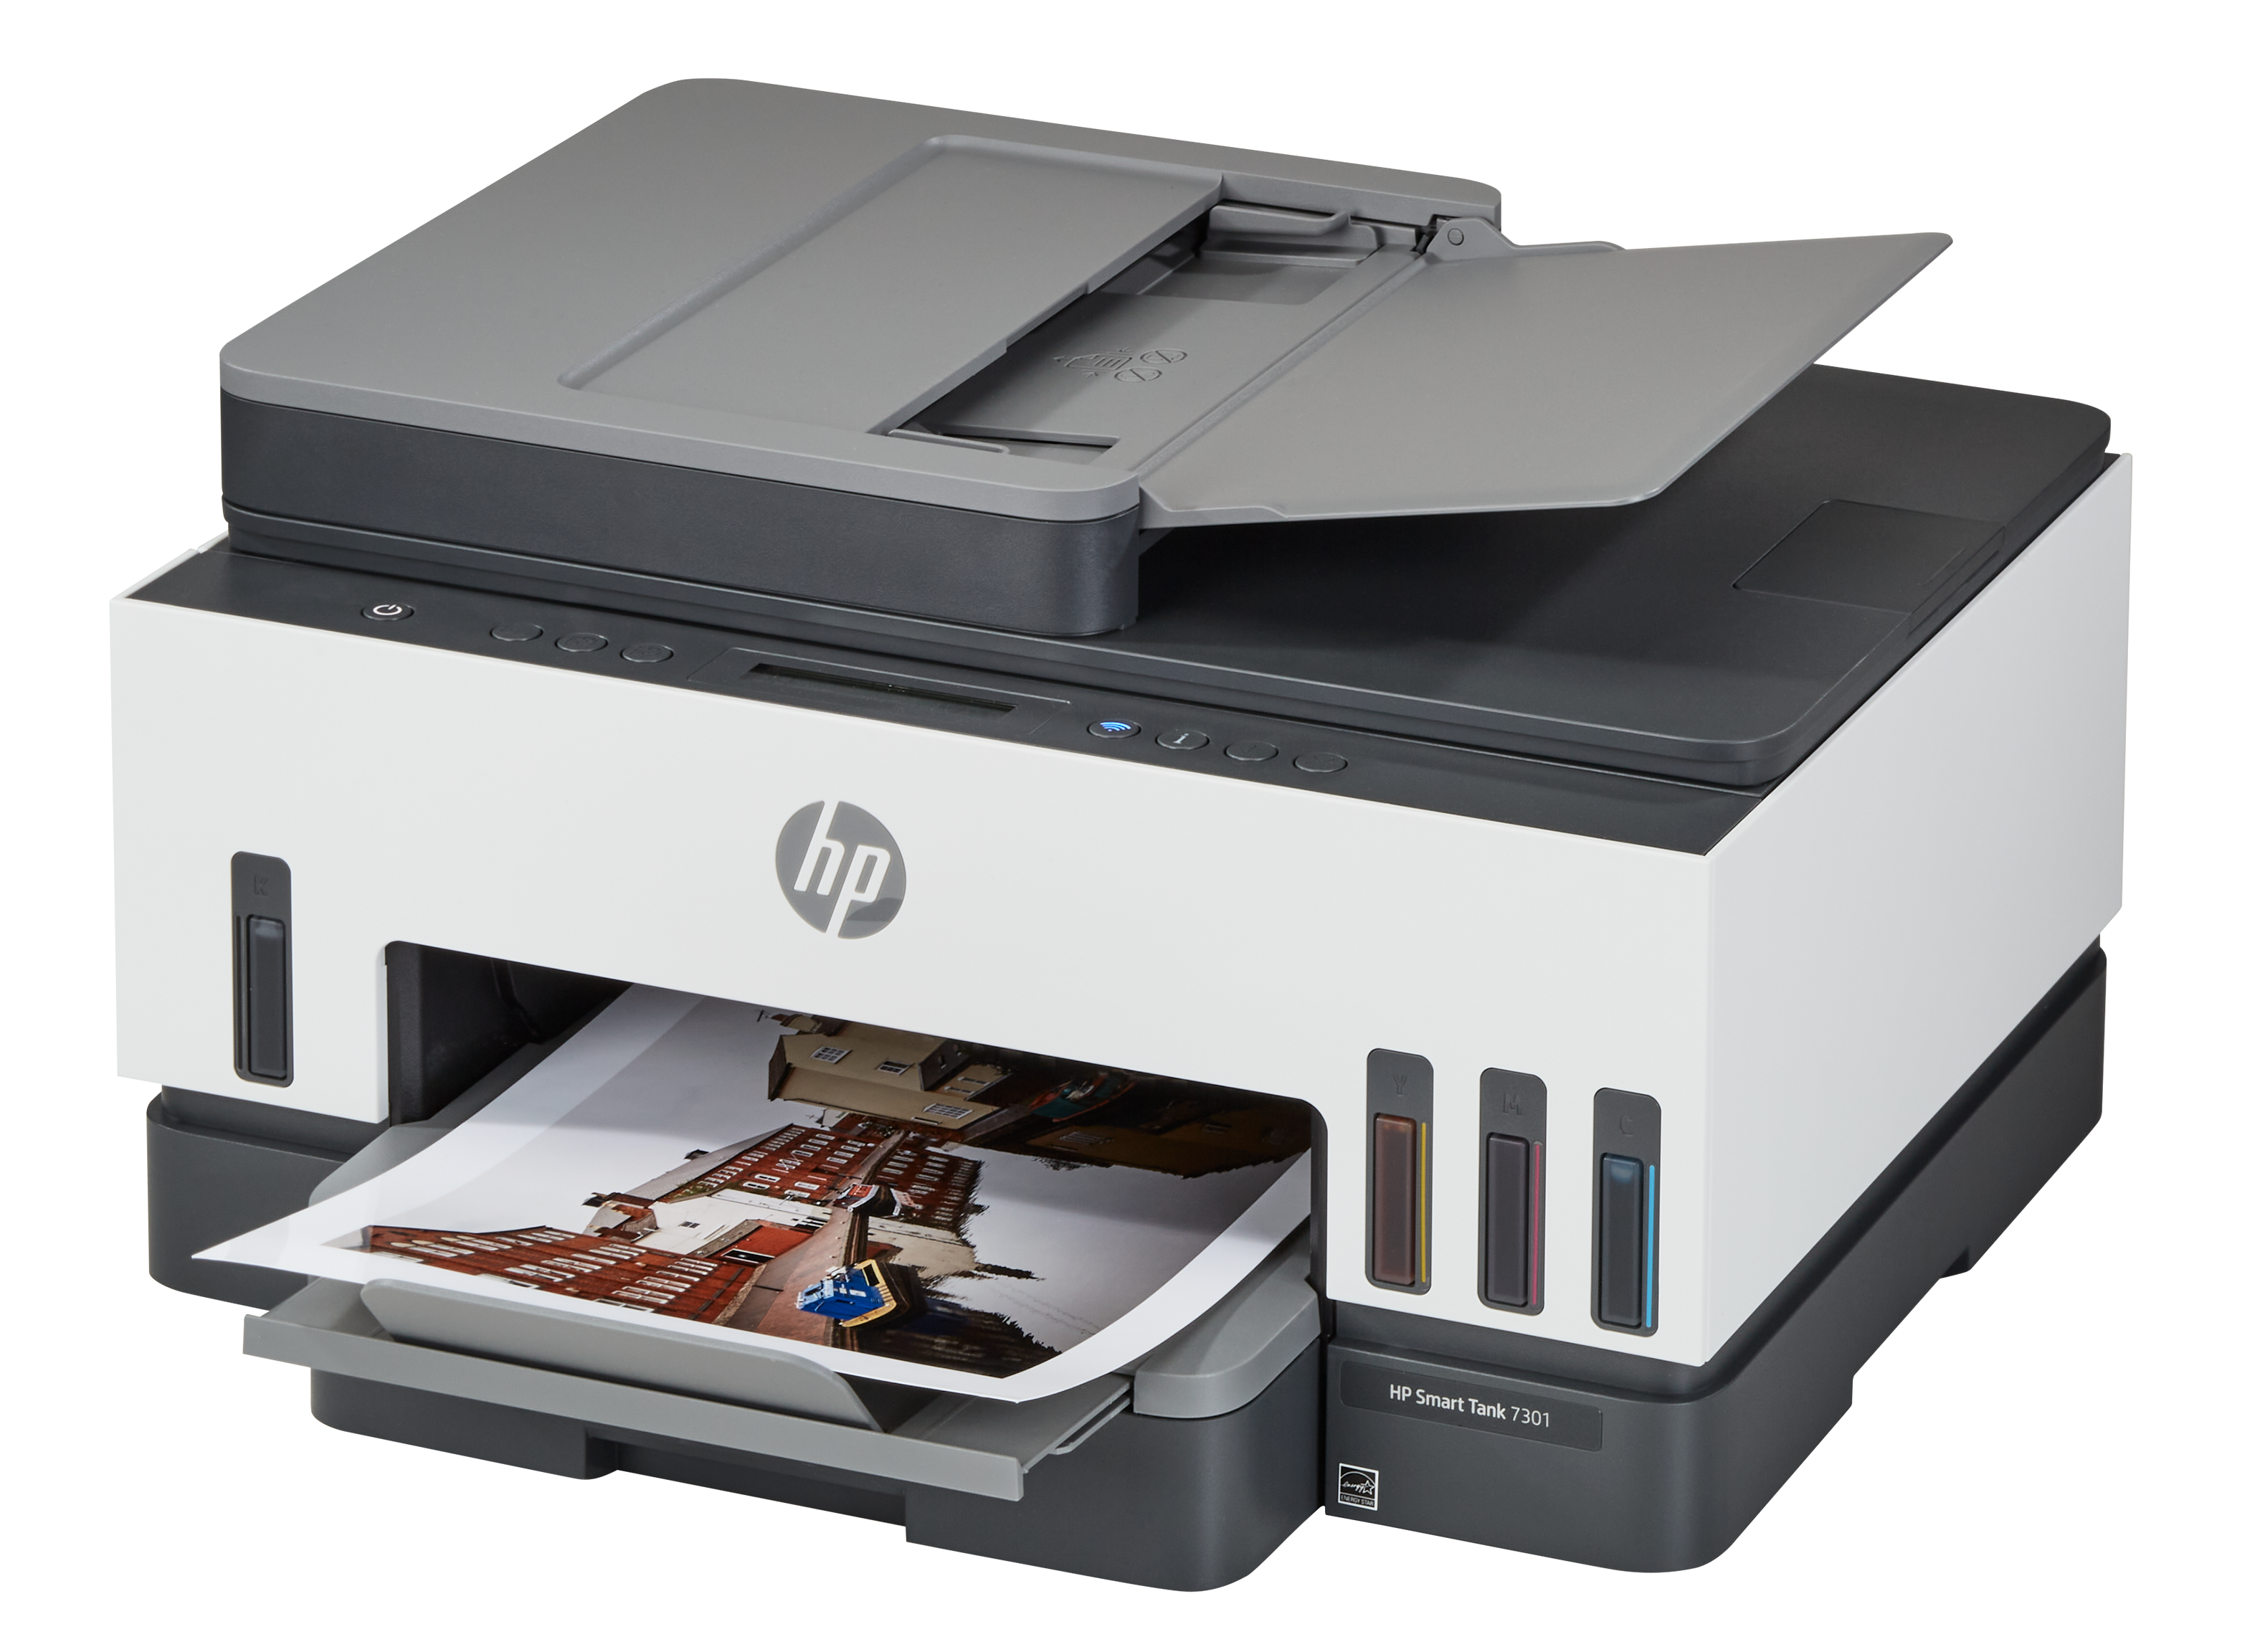 https://crdms.images.consumerreports.org/prod/products/cr/models/405111-all-in-one-inkjet-printers-hp-smart-tank-7301-10026126.png